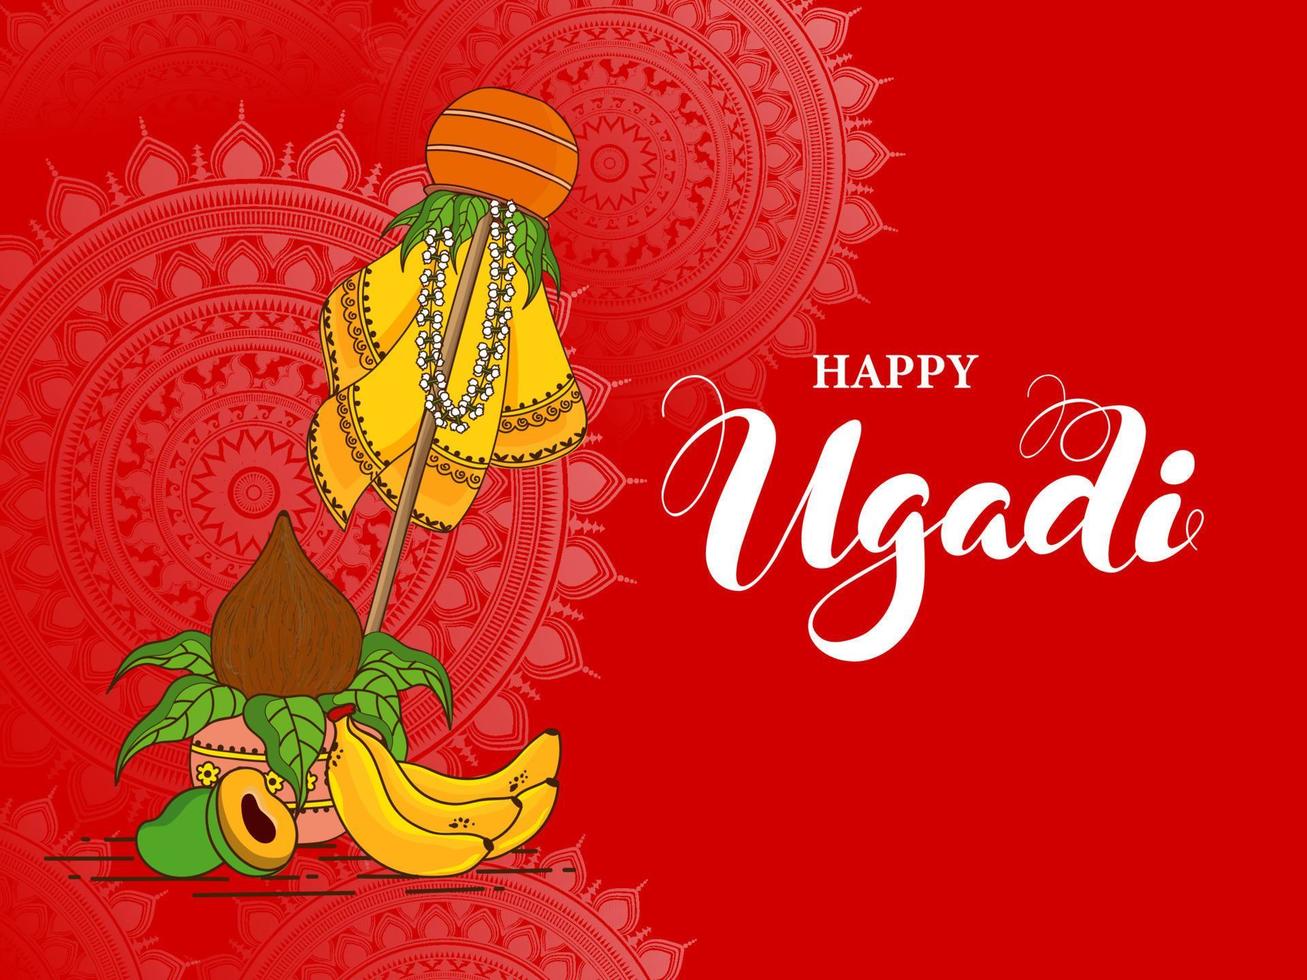 Happy Ugadi Celebration Concept with Traditional Gudhi, Fruits and Worship Pot on Red Mandala Pattern Background. vector